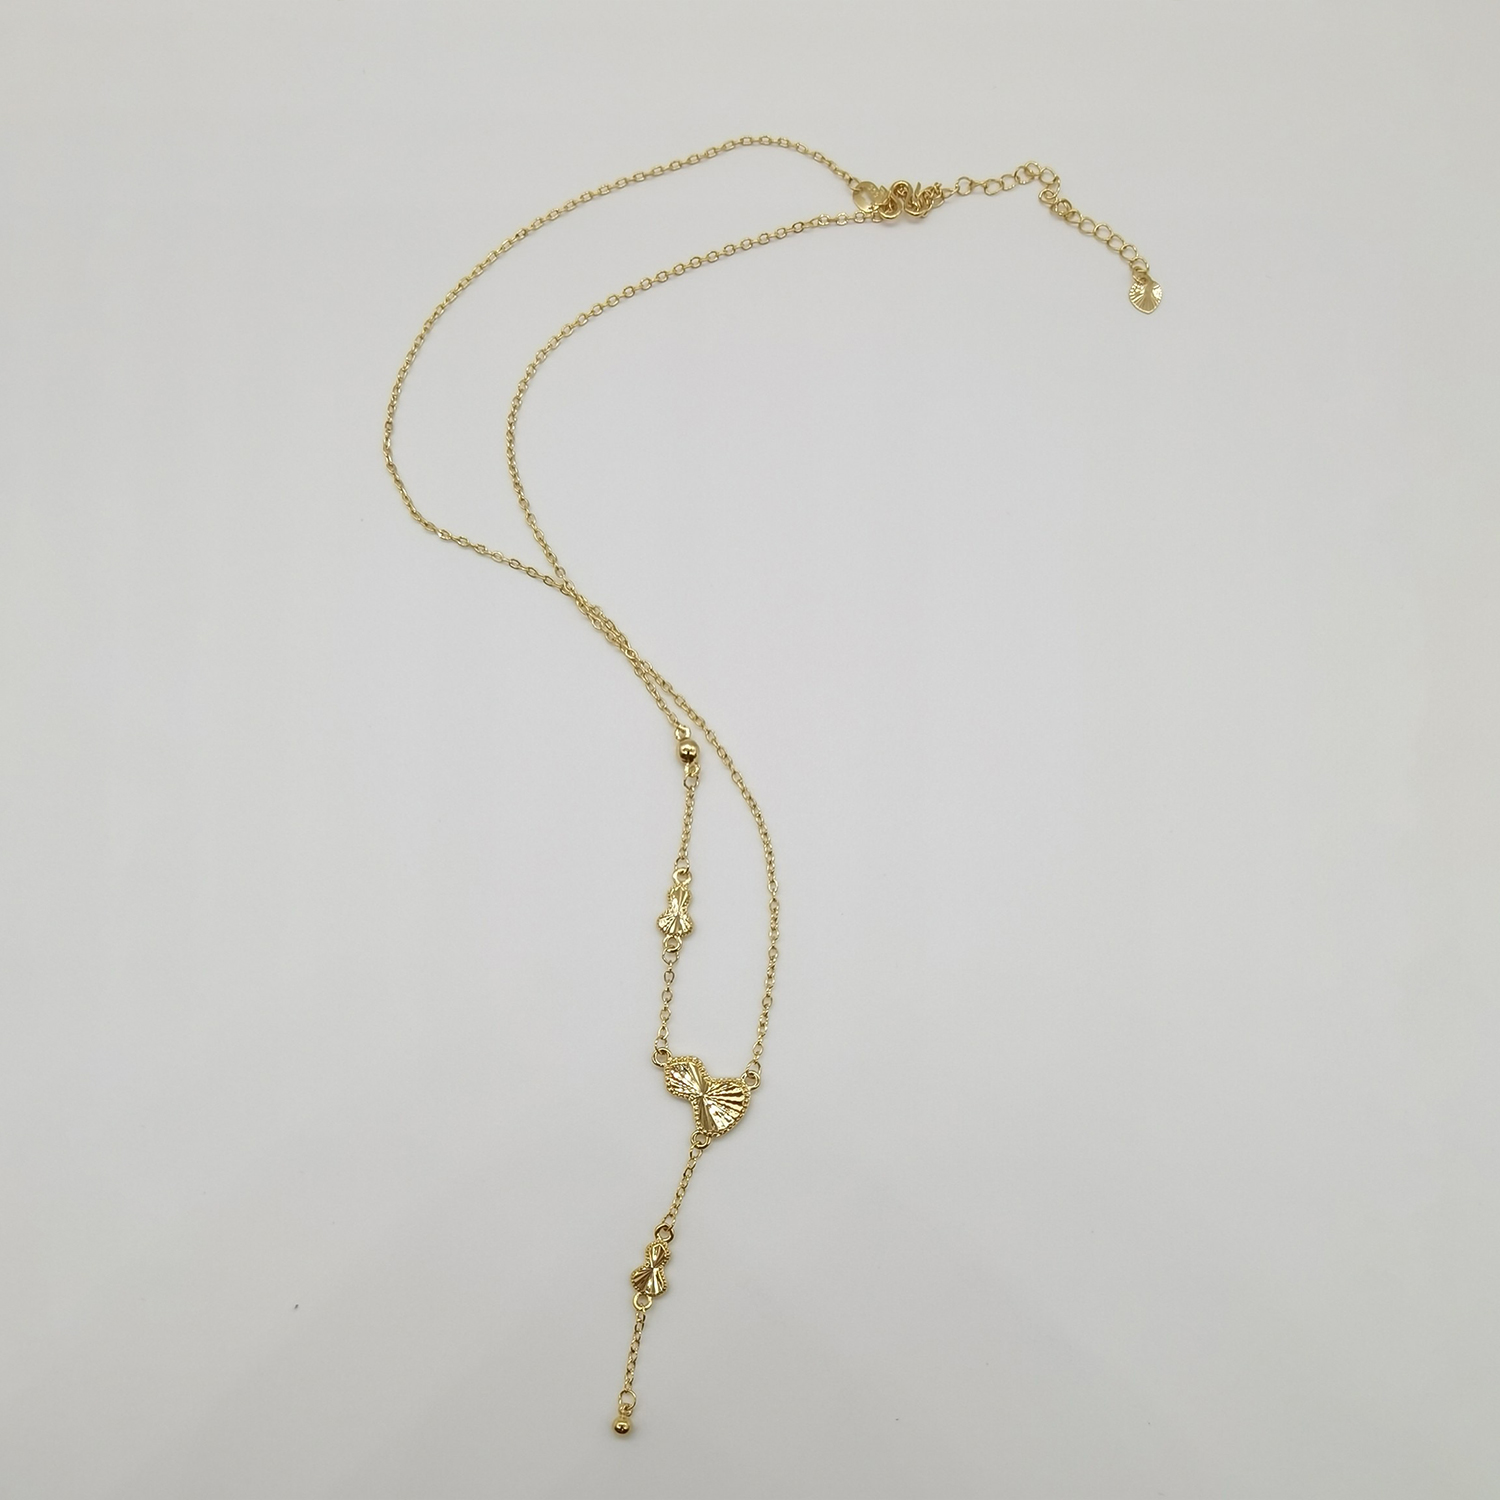 Alluvial gold vacuum electroplating 24K gold gourd tassel necklace